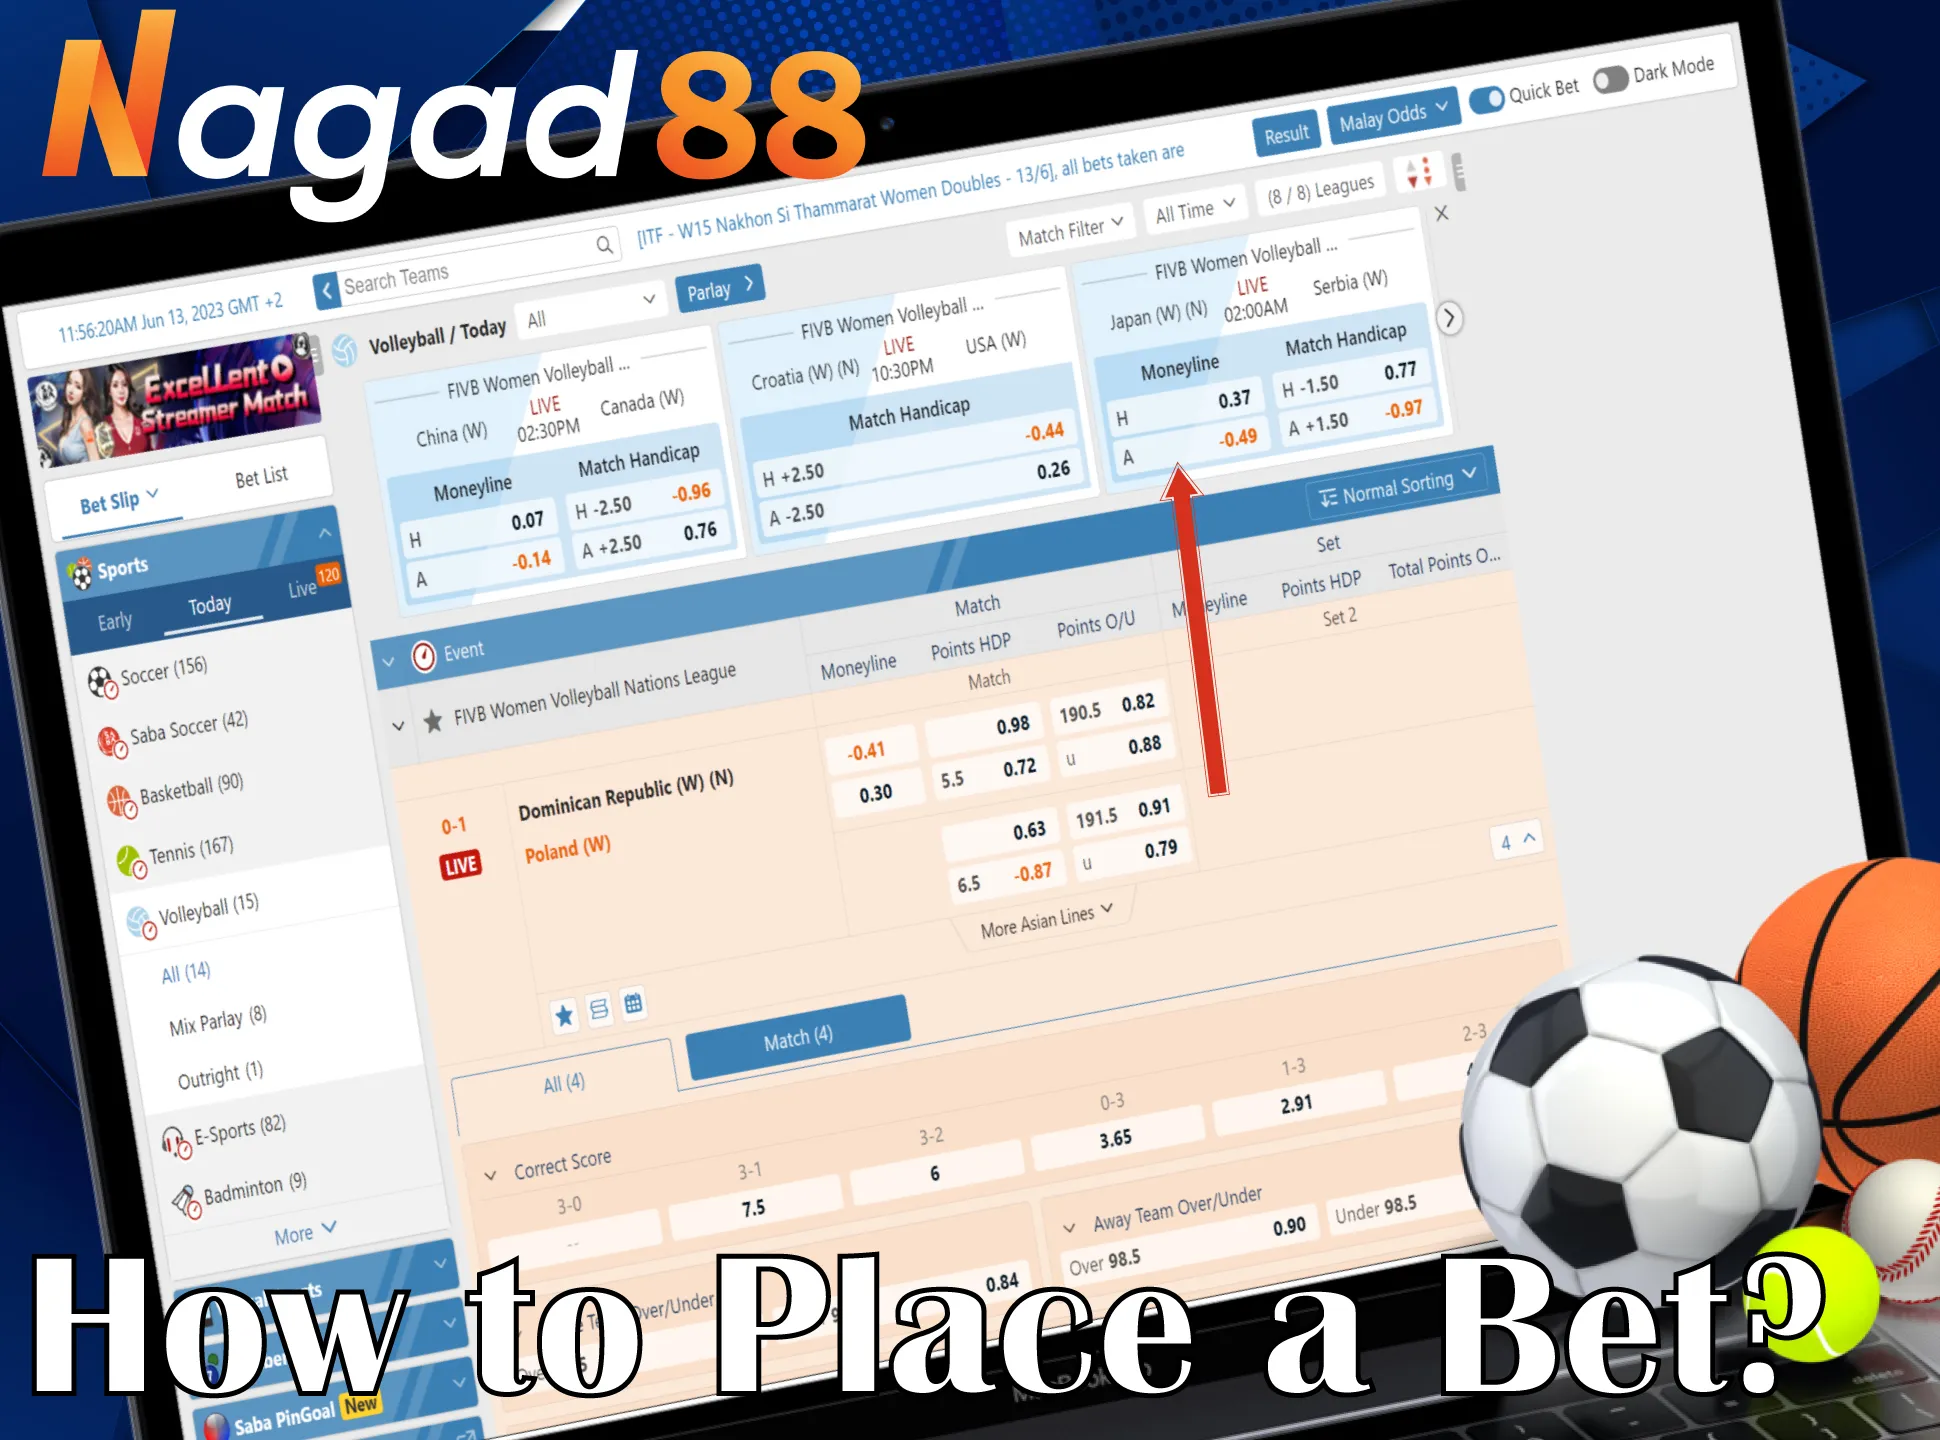 With this simple instruction, start betting on Nagad88 quickly and easily.